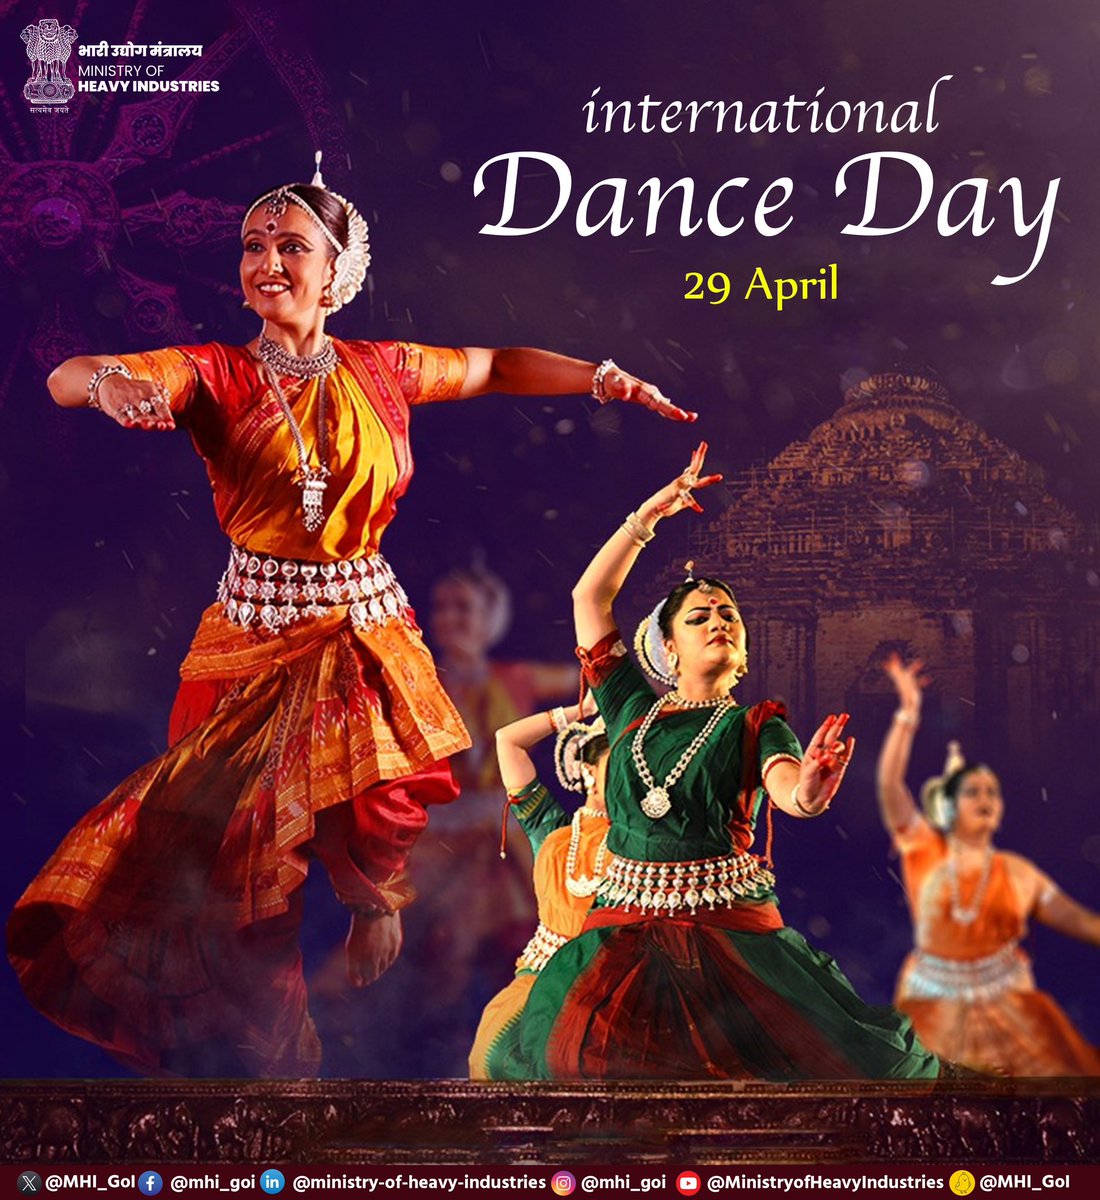 On #InternationalDanceDay, let's revel in India's diverse dance heritage! From classical to folk, our dance forms showcase the richness of our culture. Cheers to the talented artists who keep these traditions alive, spreading joy and beauty worldwide. #CulturalLegacy